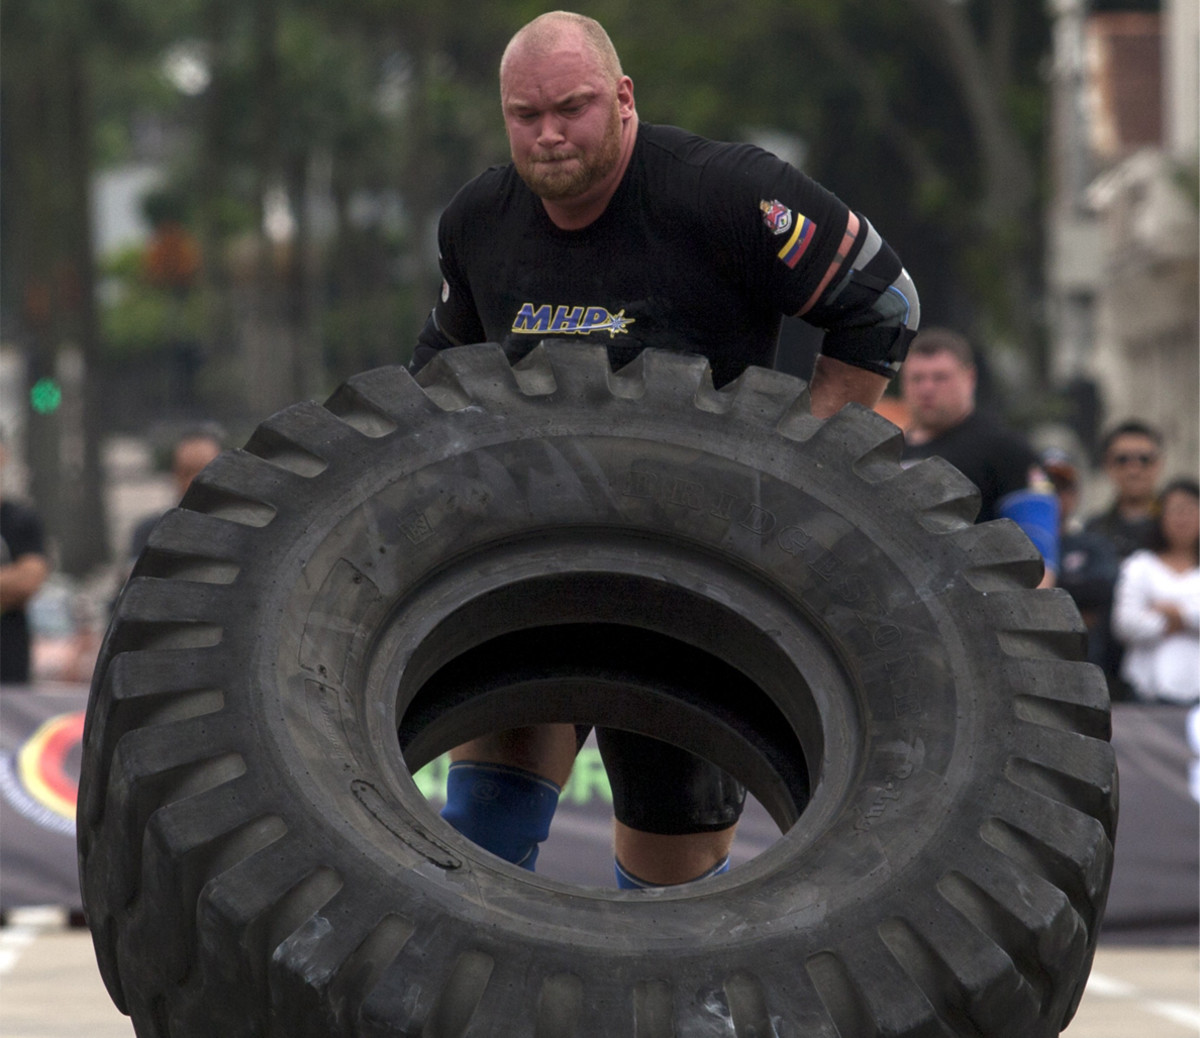 The Events for the 2016 World's Strongest Man Competition Look Unbelievably  Badass and/or Insane - Men's Journal